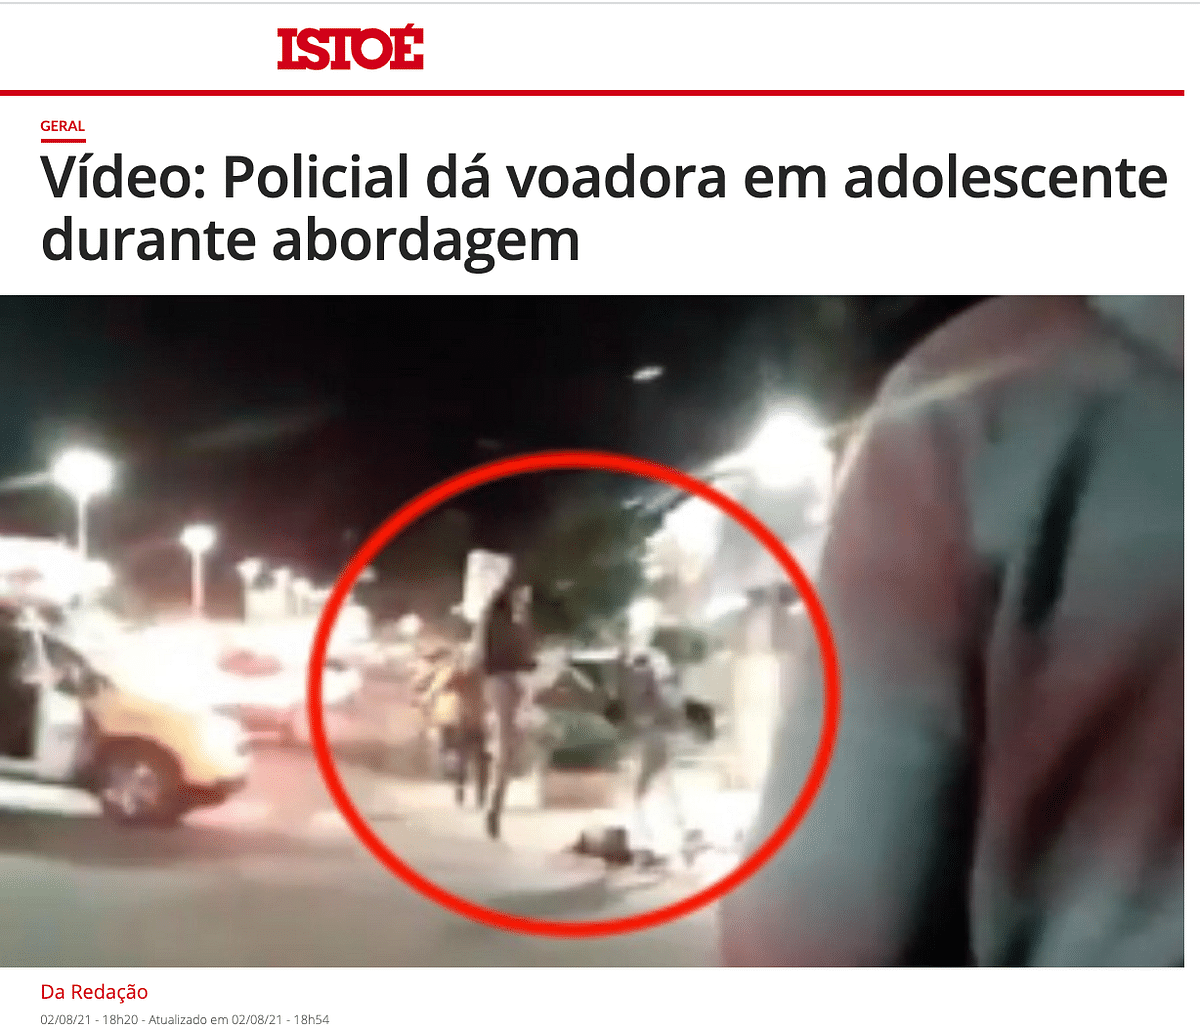 The video shows police officials chasing a 17-year-old boy in Brazil's Pérola on 1 August.